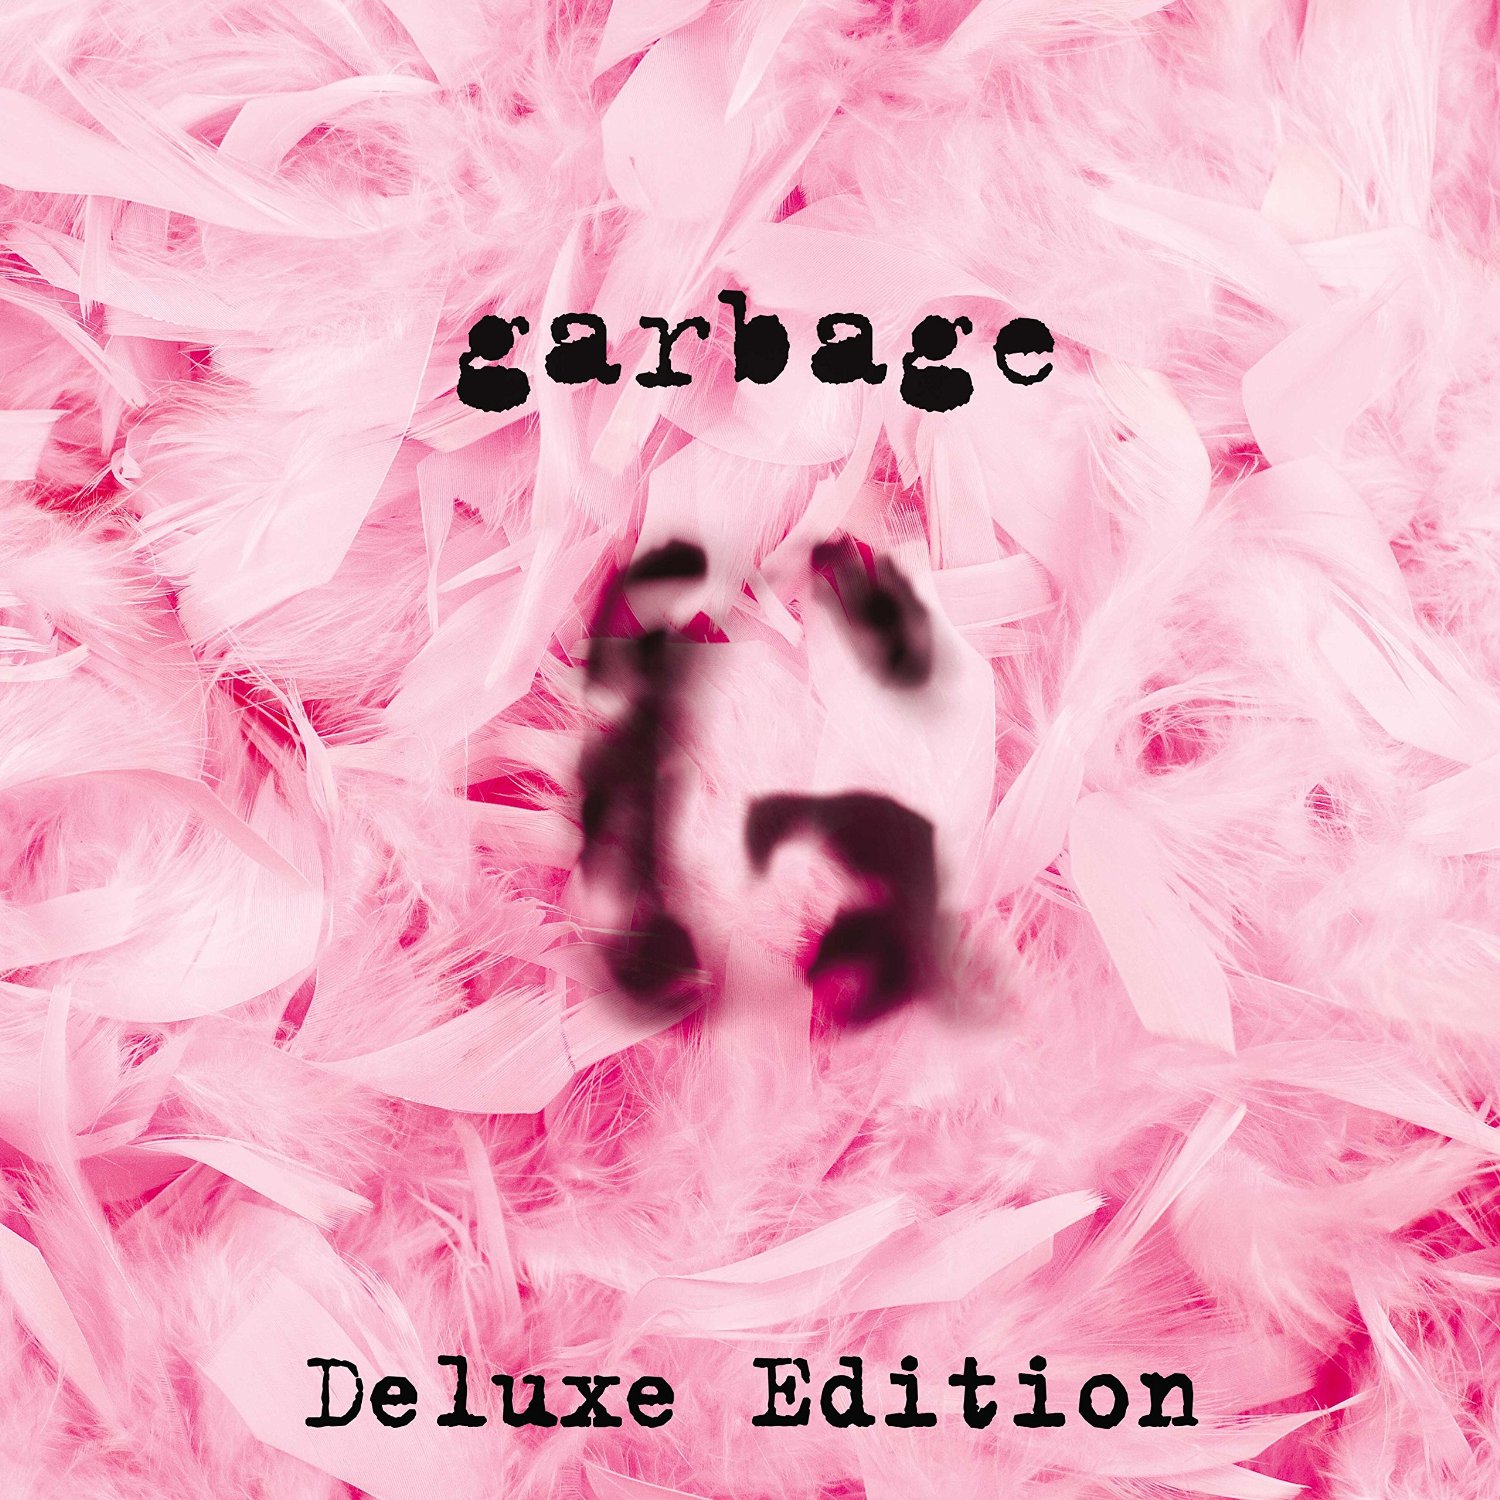 Garbage - Garbage {20th Anniversary Deluxe Edition-Remastered} (1995/2015) [HDTracks FLAC 24bit/96kHz]